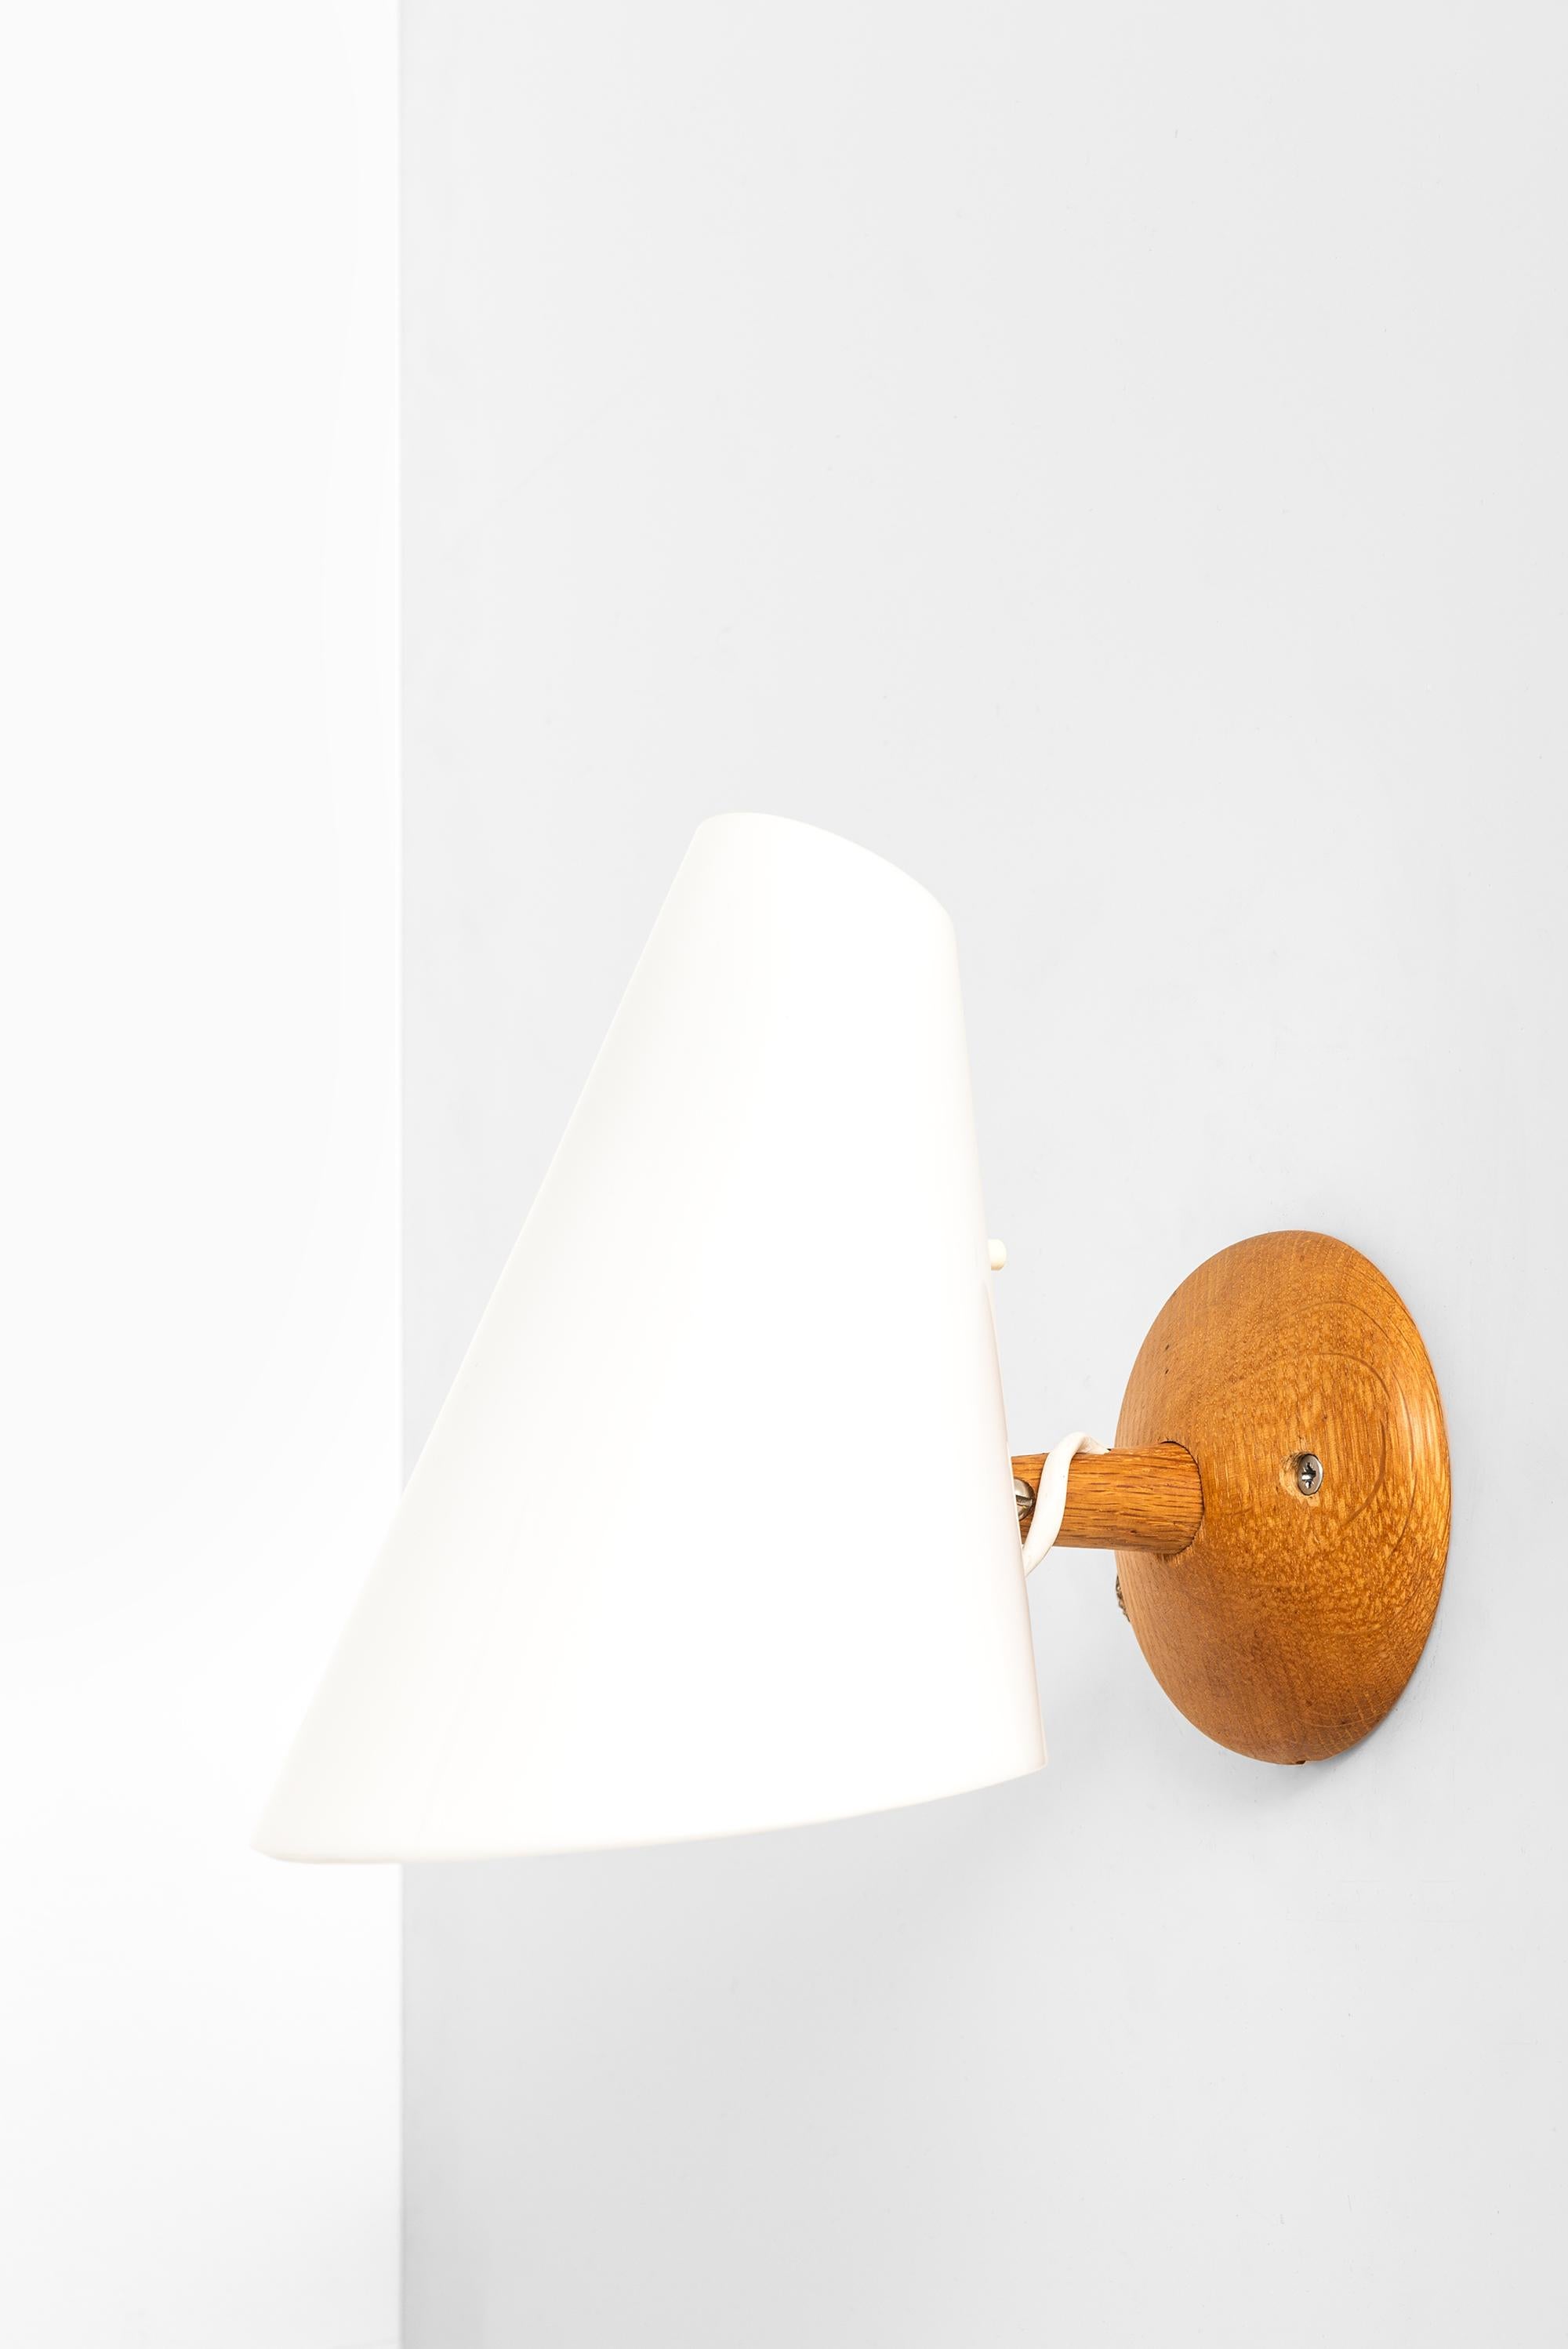 Rare wall lamps designed by Uno & Östen Kristiansson. Produced by Luxus in Vittsjö, Sweden.

The listed price is for one lamp, there are 3 lamps available.